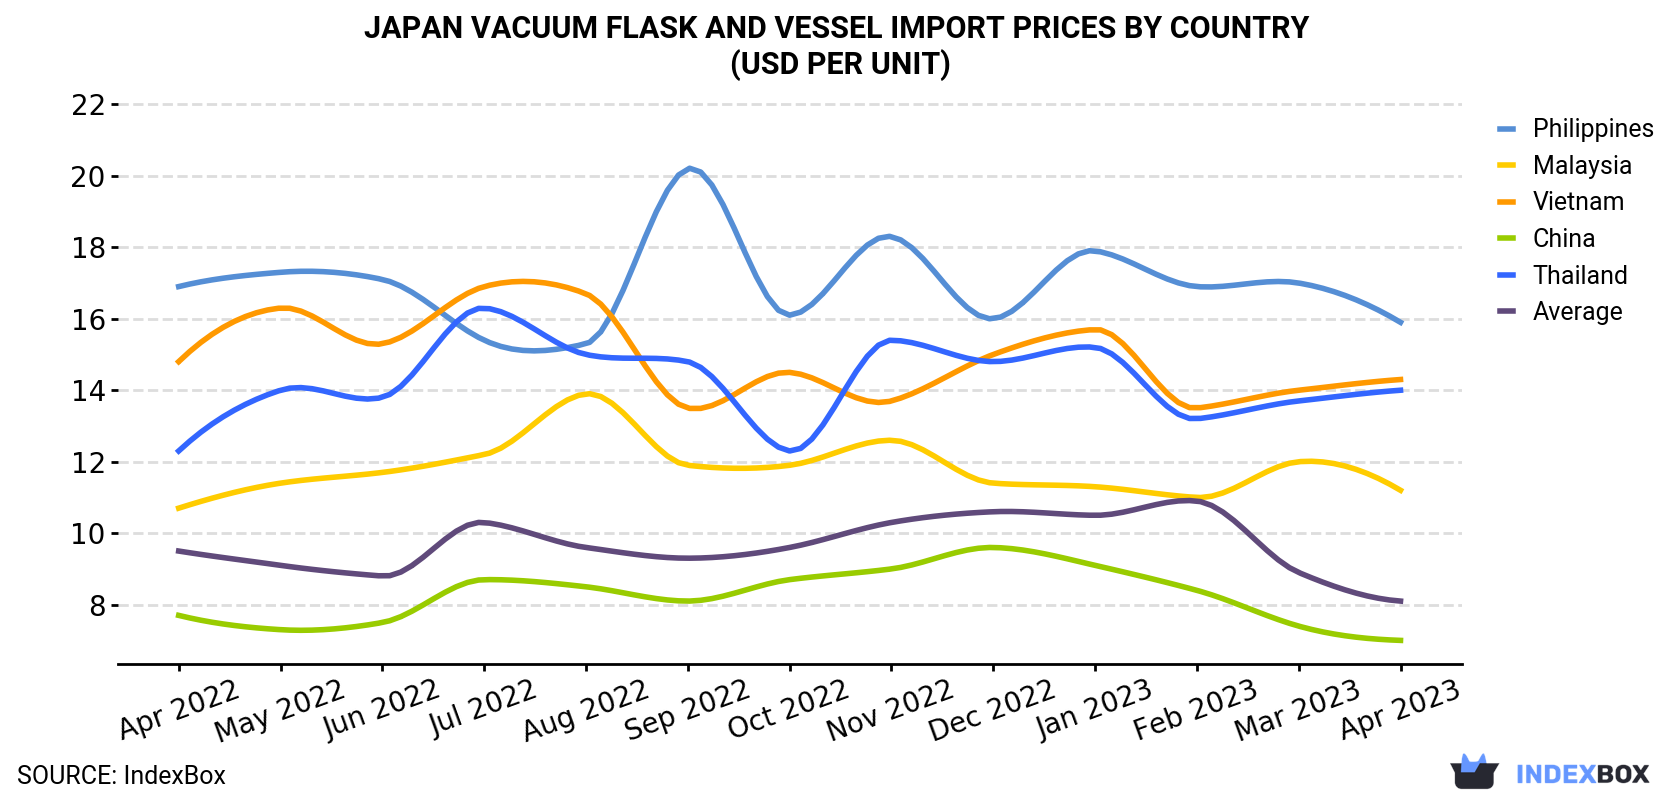 Japan Vacuum Flask and Vessel Import Prices By Country (USD Per Unit)